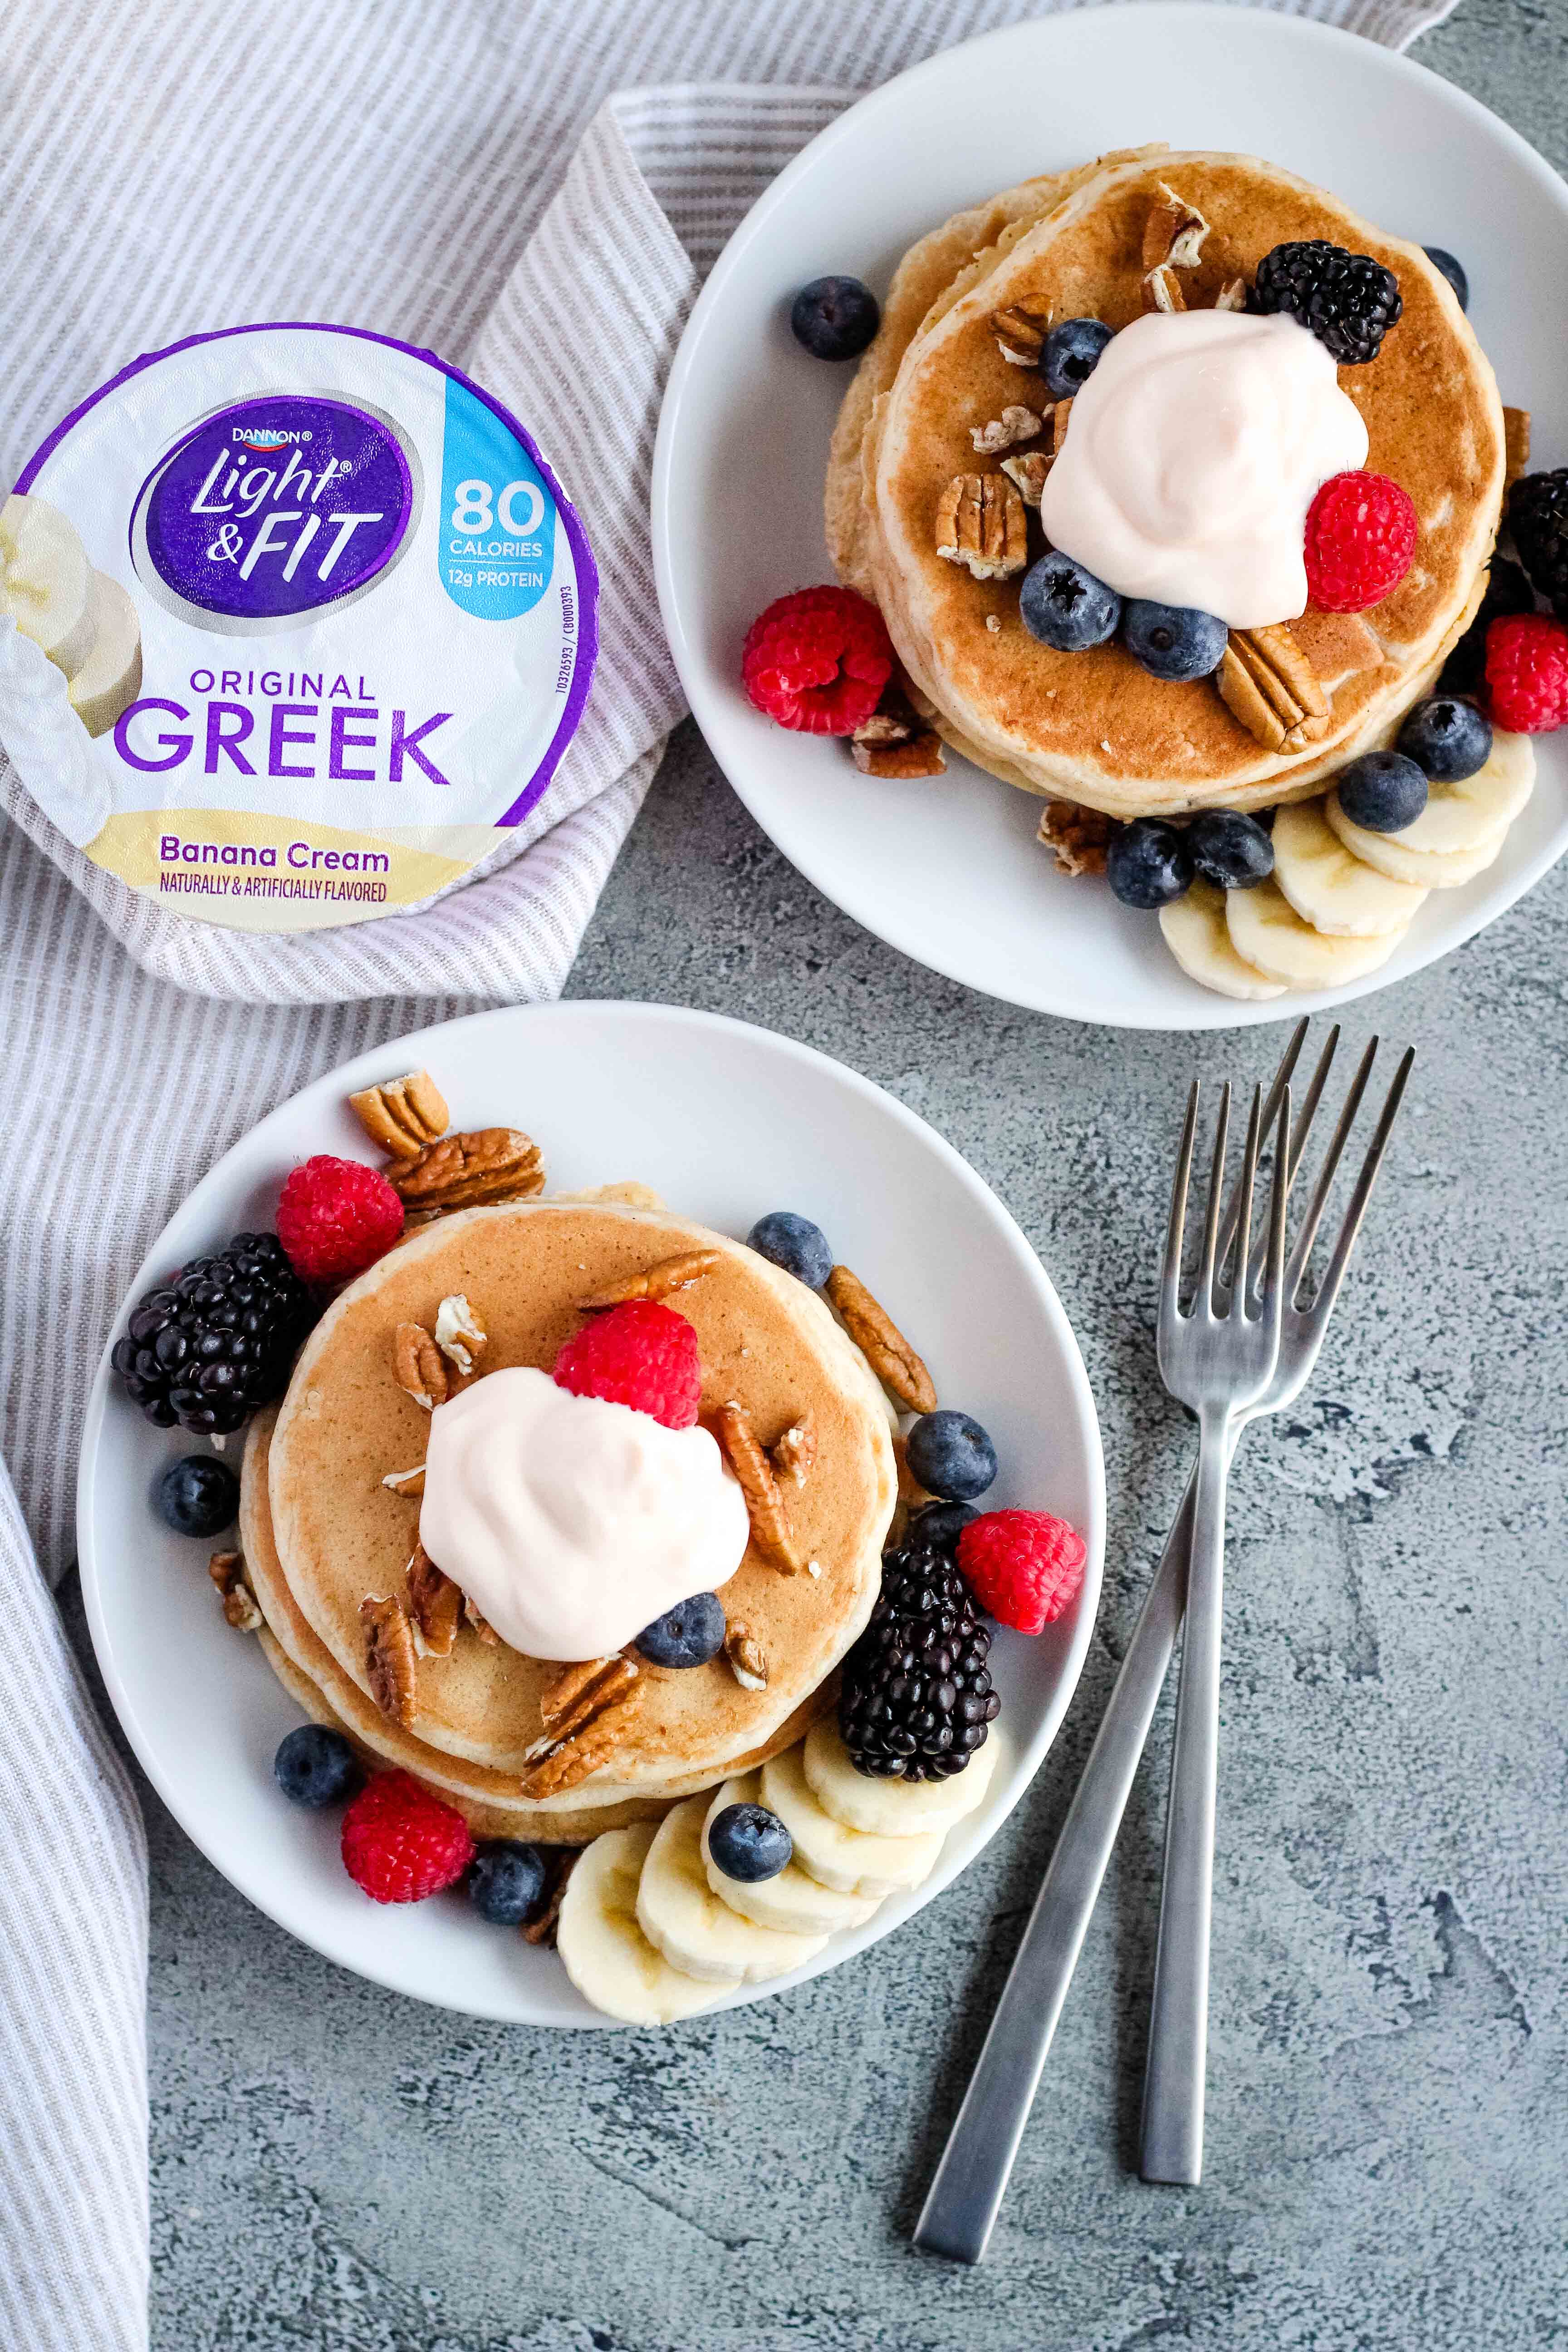 Banana Cream and Cardamom Pancakes | Upgrade your holiday breakfast plans with these fluffy and flavorful Banana Cream and Cardamom Pancakes with Dannon Light & Fit